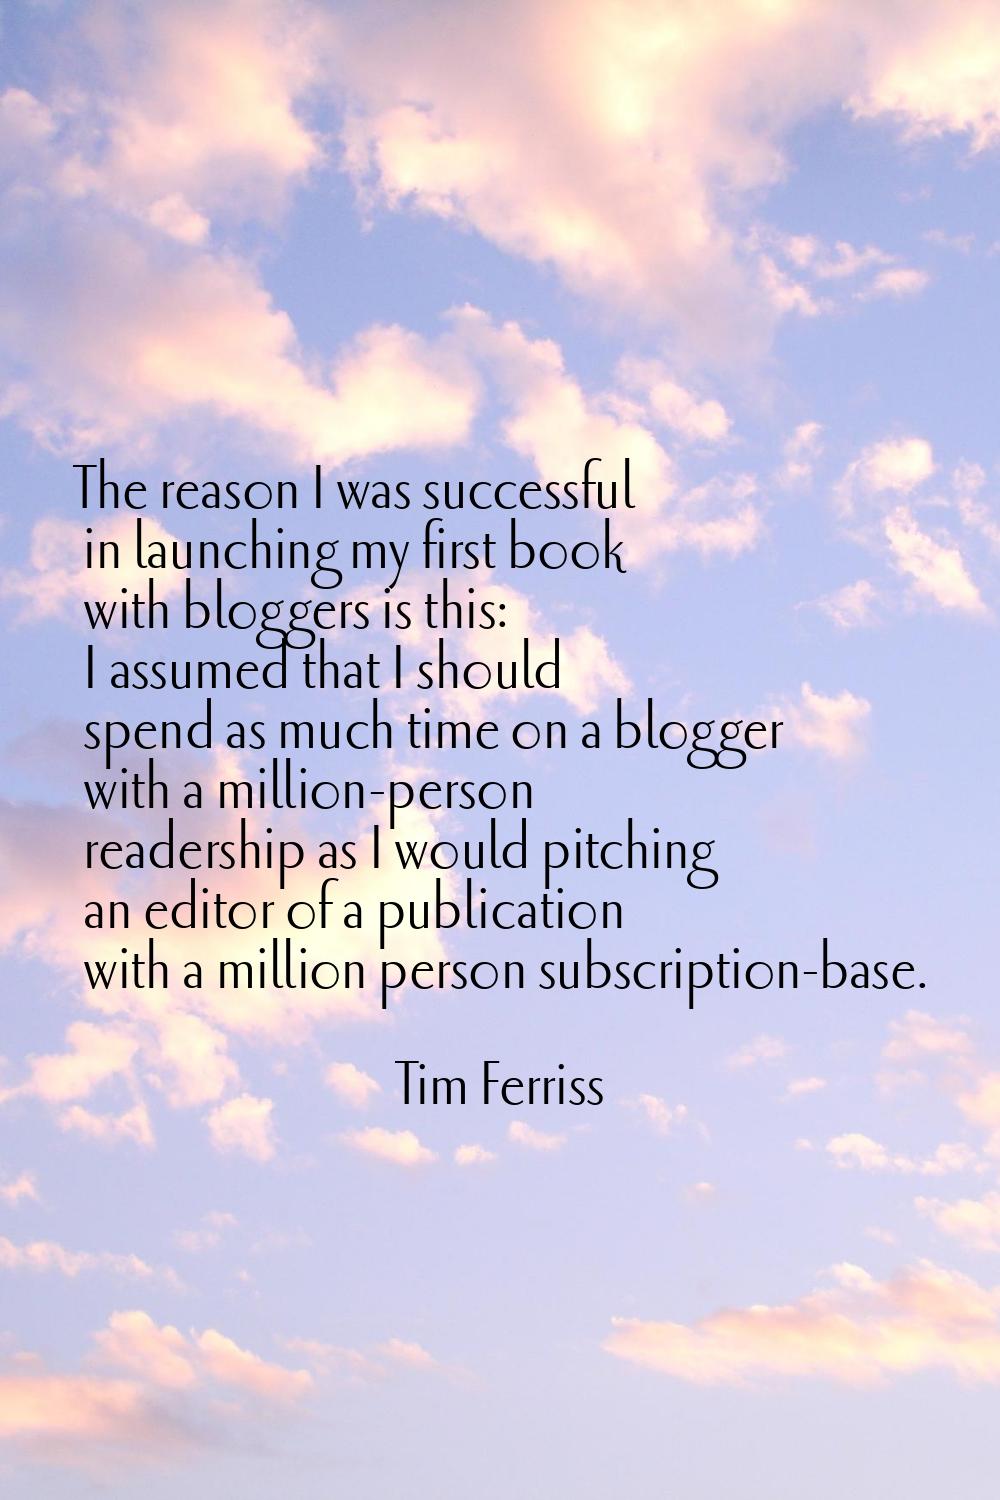 The reason I was successful in launching my first book with bloggers is this: I assumed that I shou